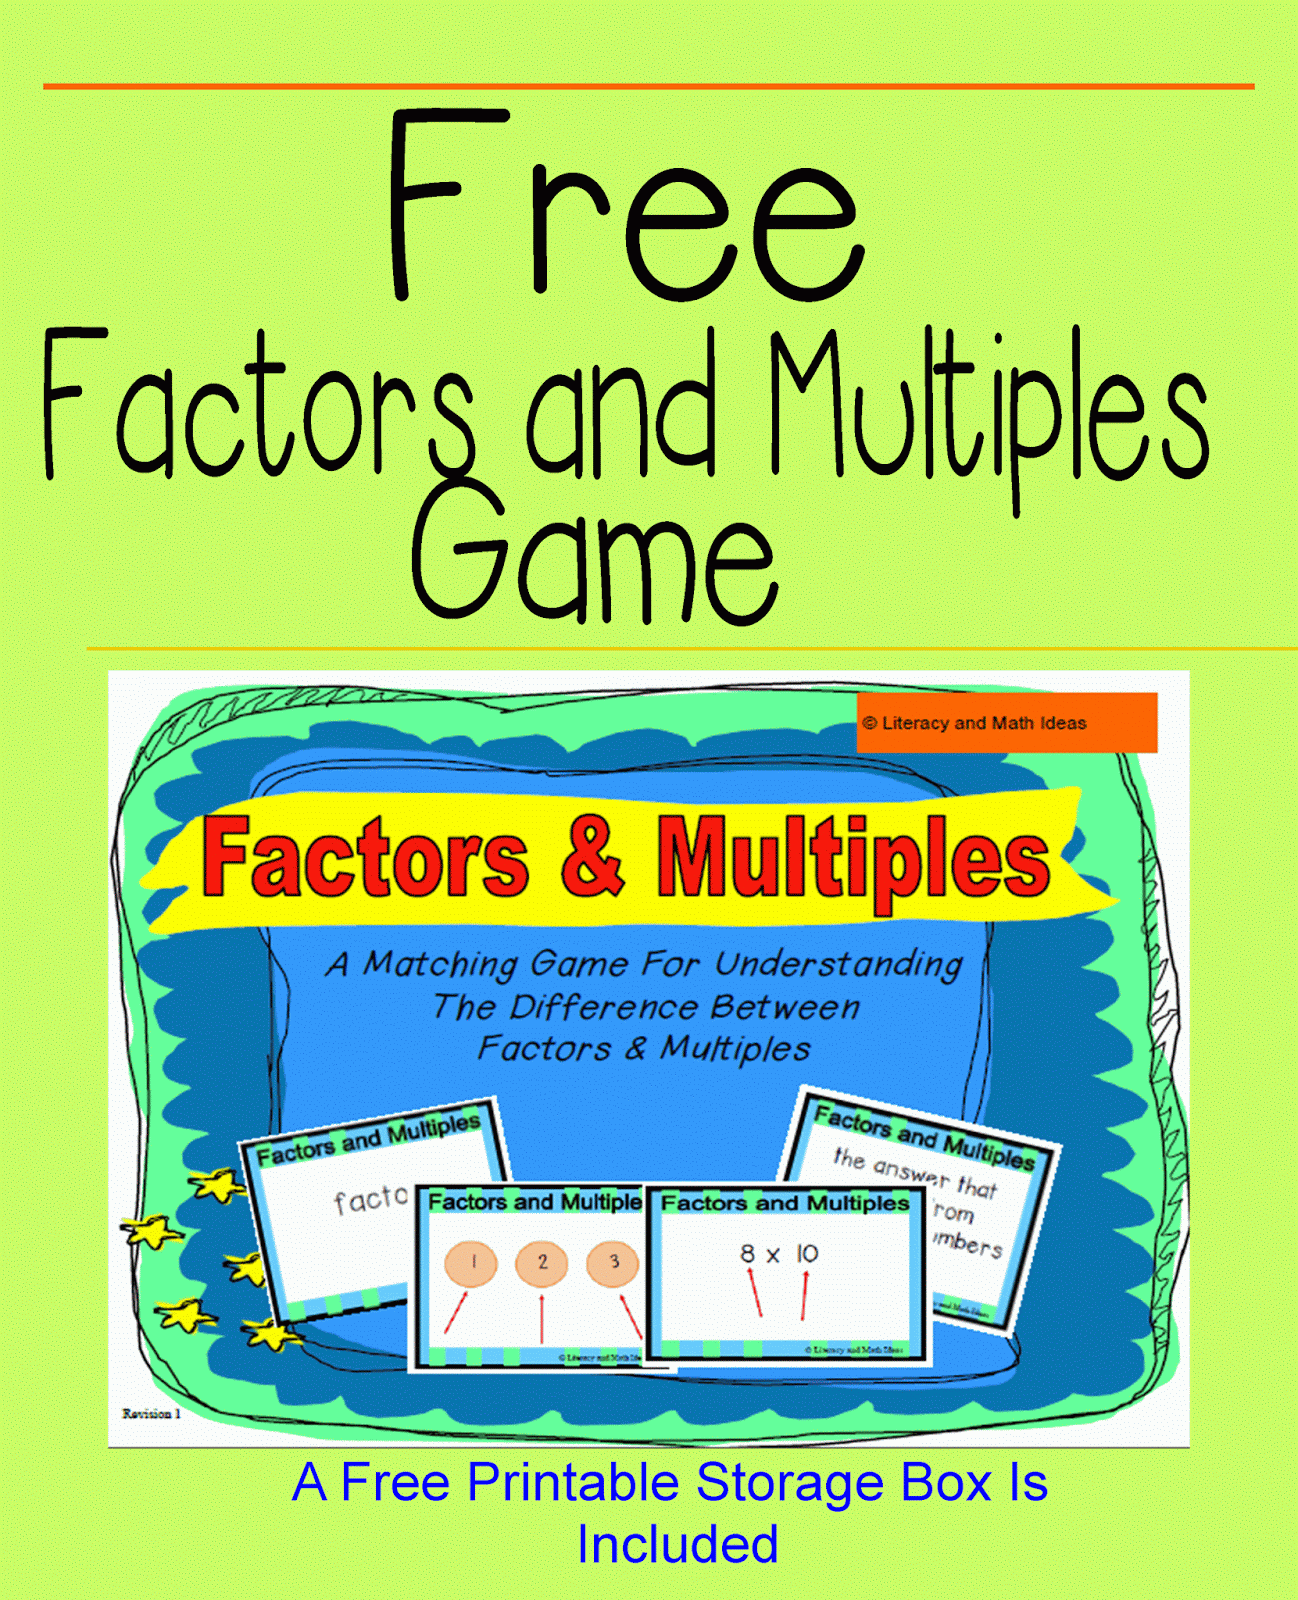 literacy-math-ideas-free-factors-and-multiples-game